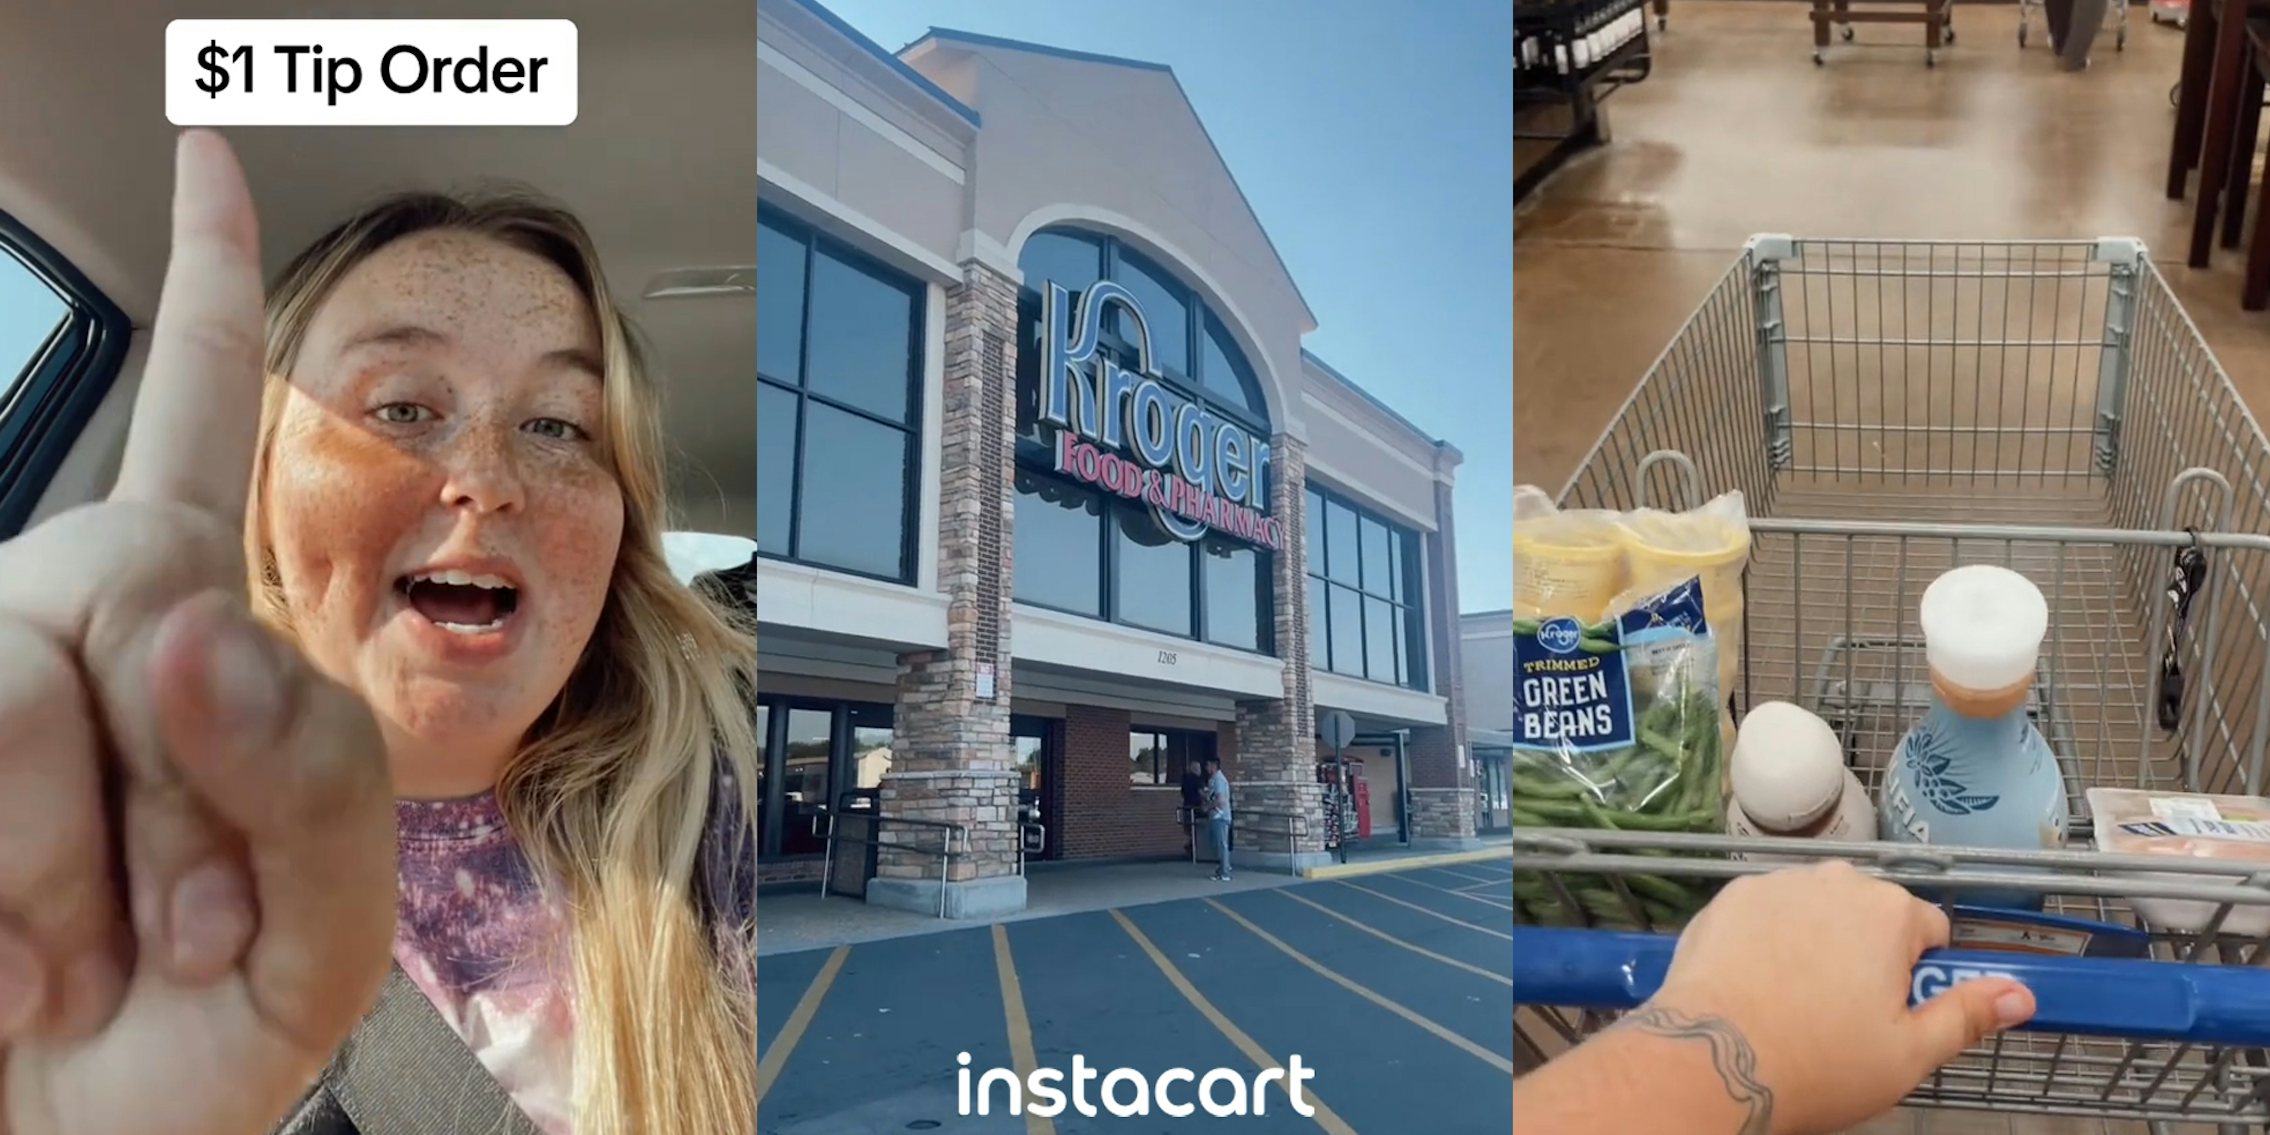 Instacart driver speaking in car with caption '$1 Tip Order' (l) Kroger grocery store with sign with Instacart logo at bottom (c) Instacart shopper pushing car with groceries inside Kroger (r)